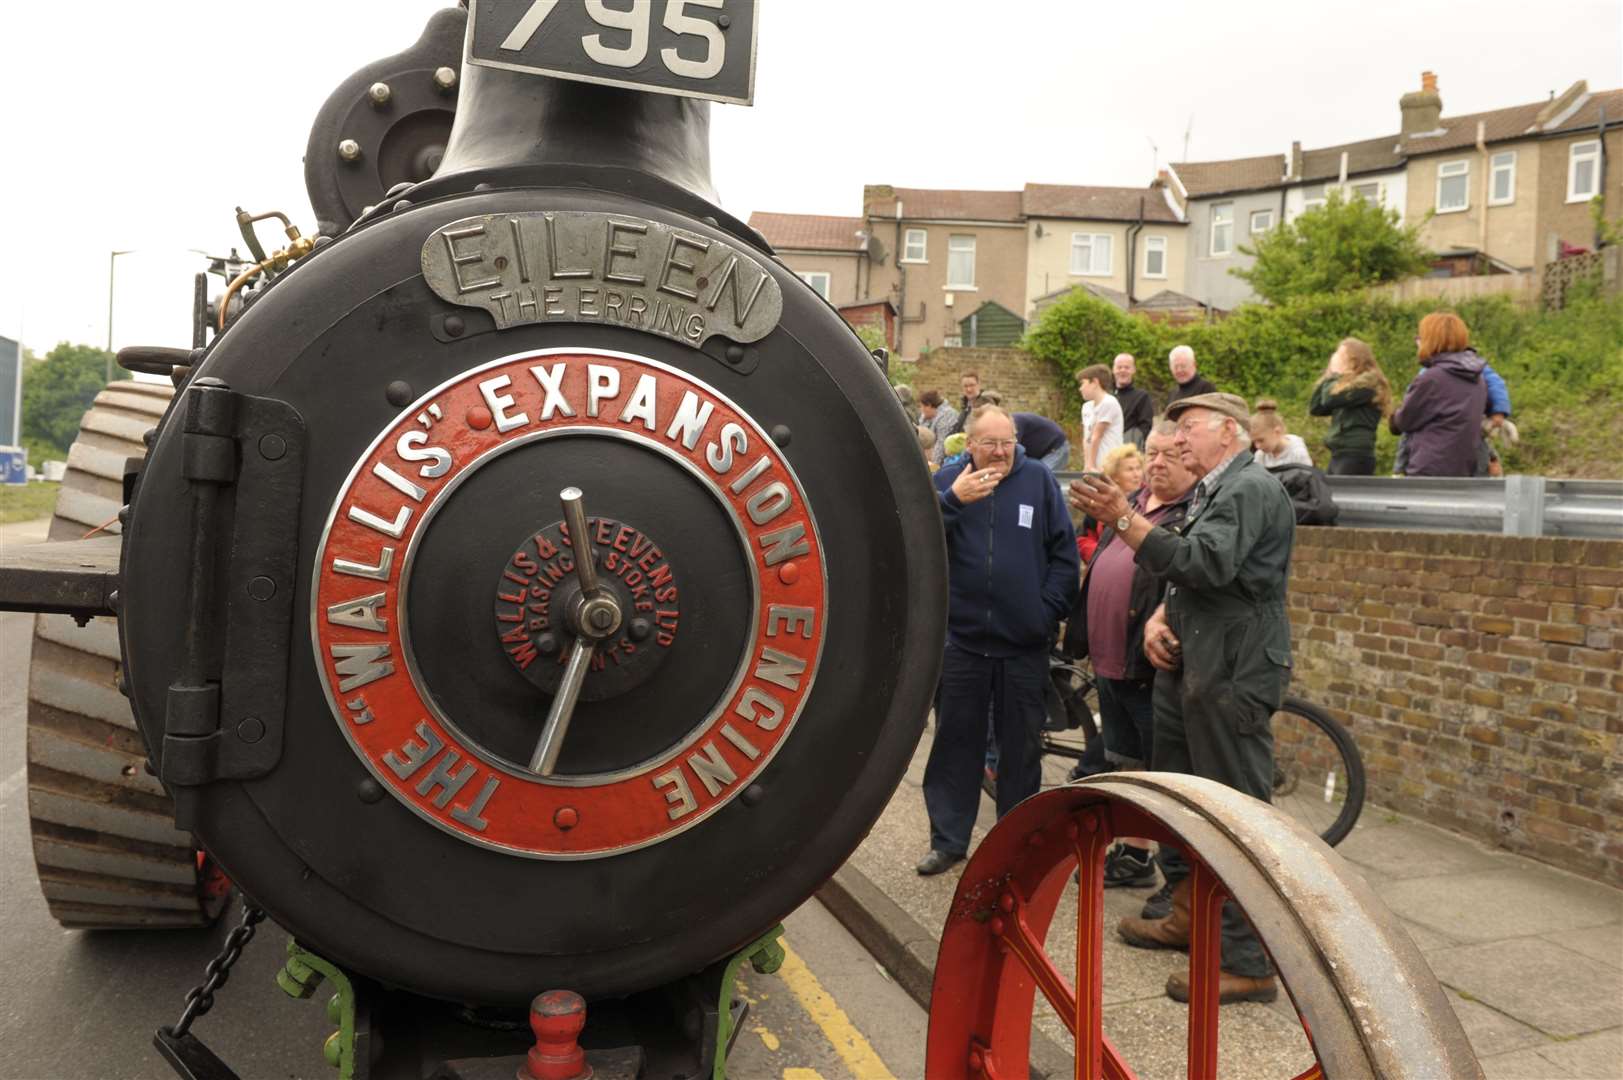 Guests enjoy a previous steam rally in Dartford